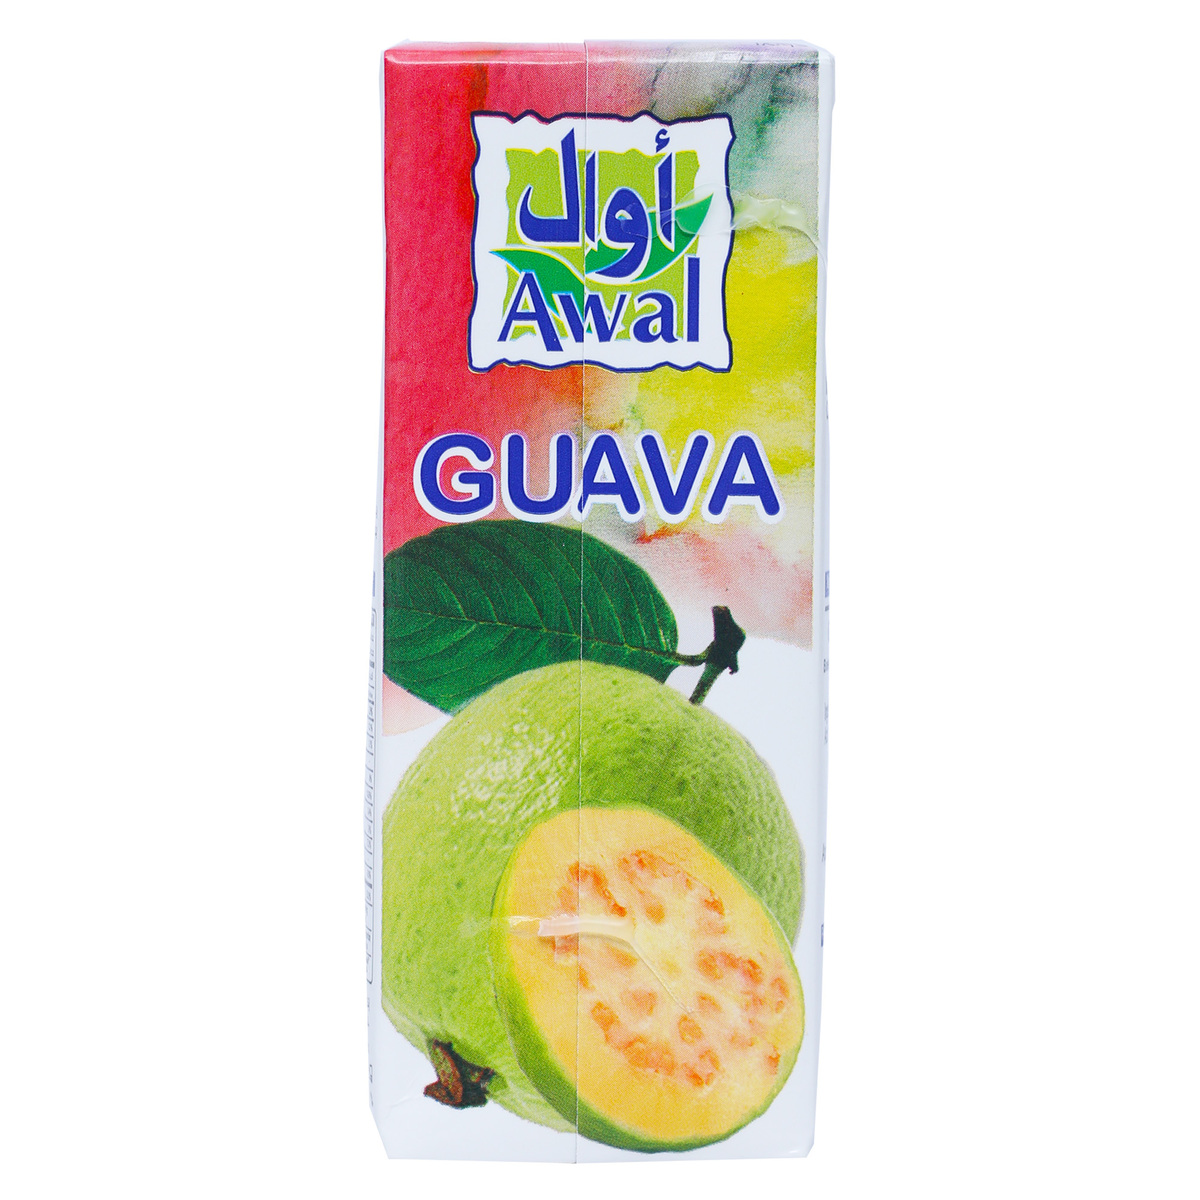 Awal Guava Fruit Drink 6 x 200 ml